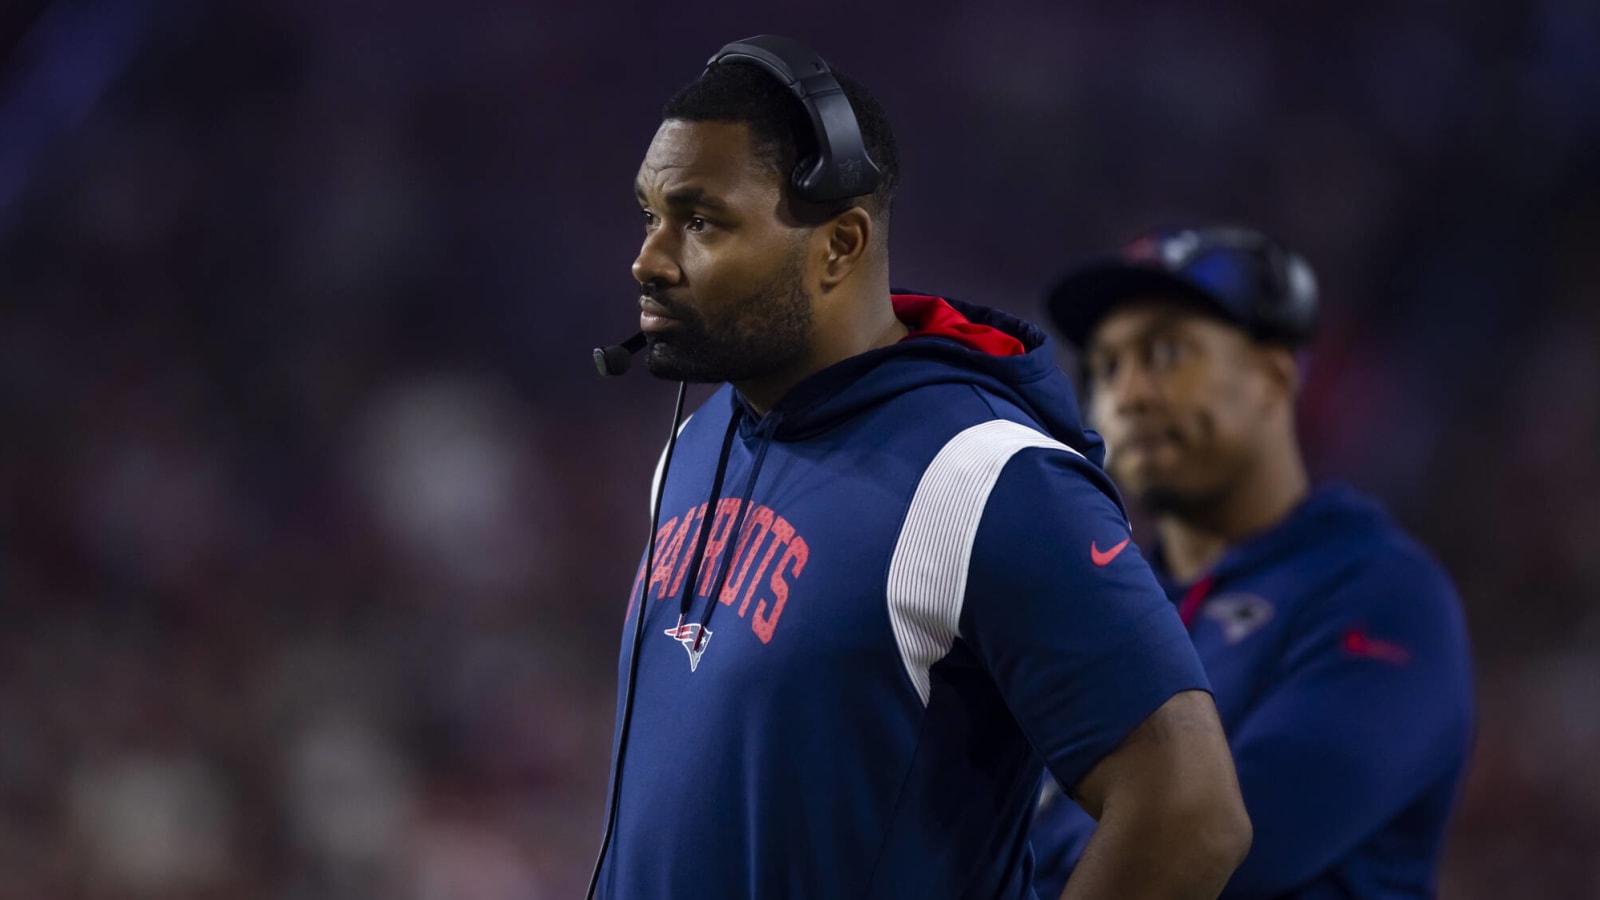 This coach could be emerging as top Patriots candidate